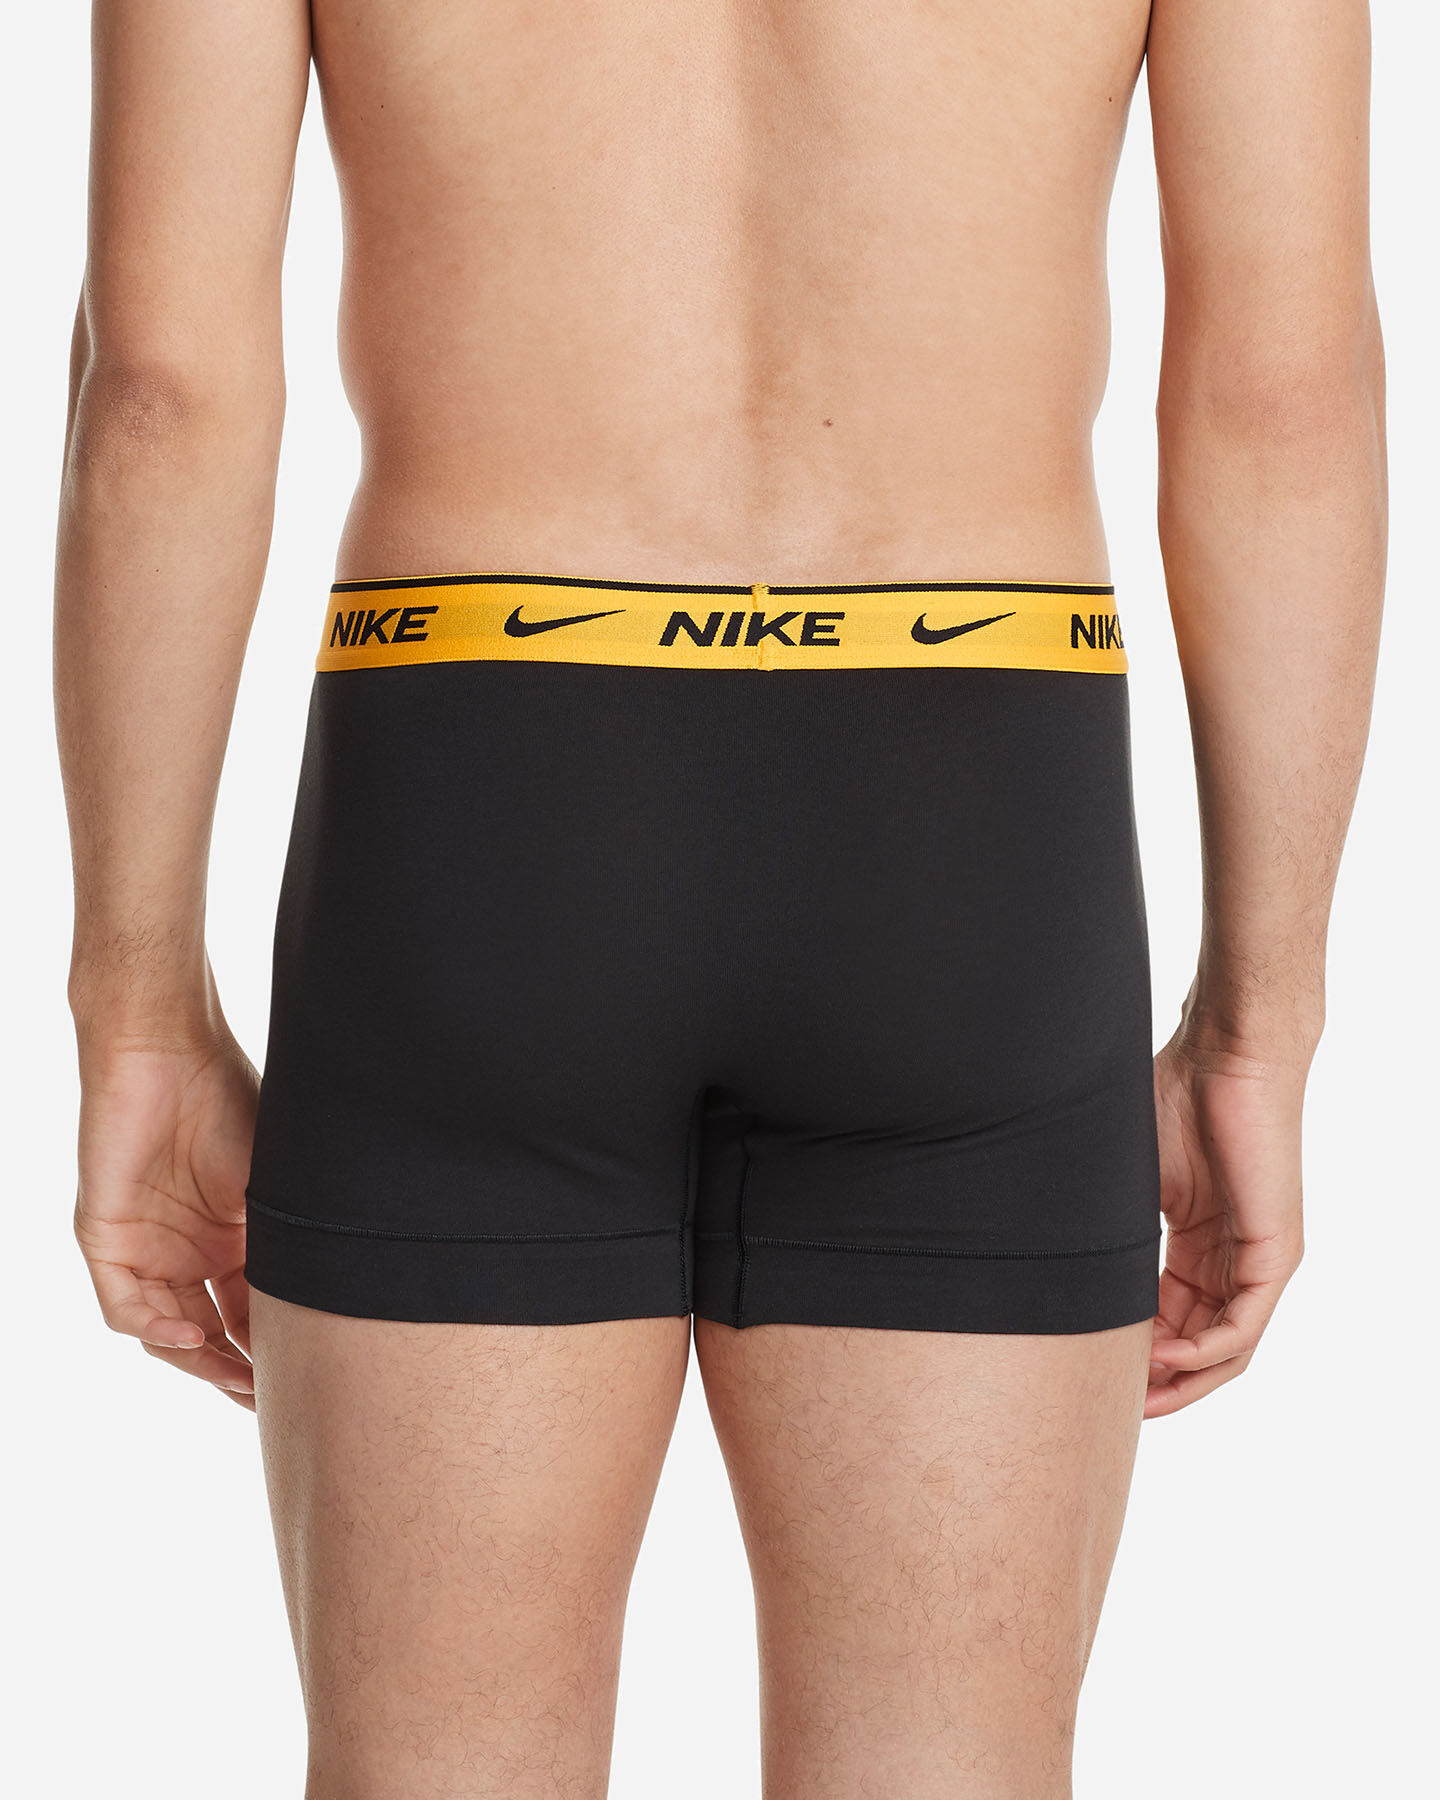  Intimo NIKE 3PACK BOXER EVERYDAY M S4099884|M1R|XL scatto 3